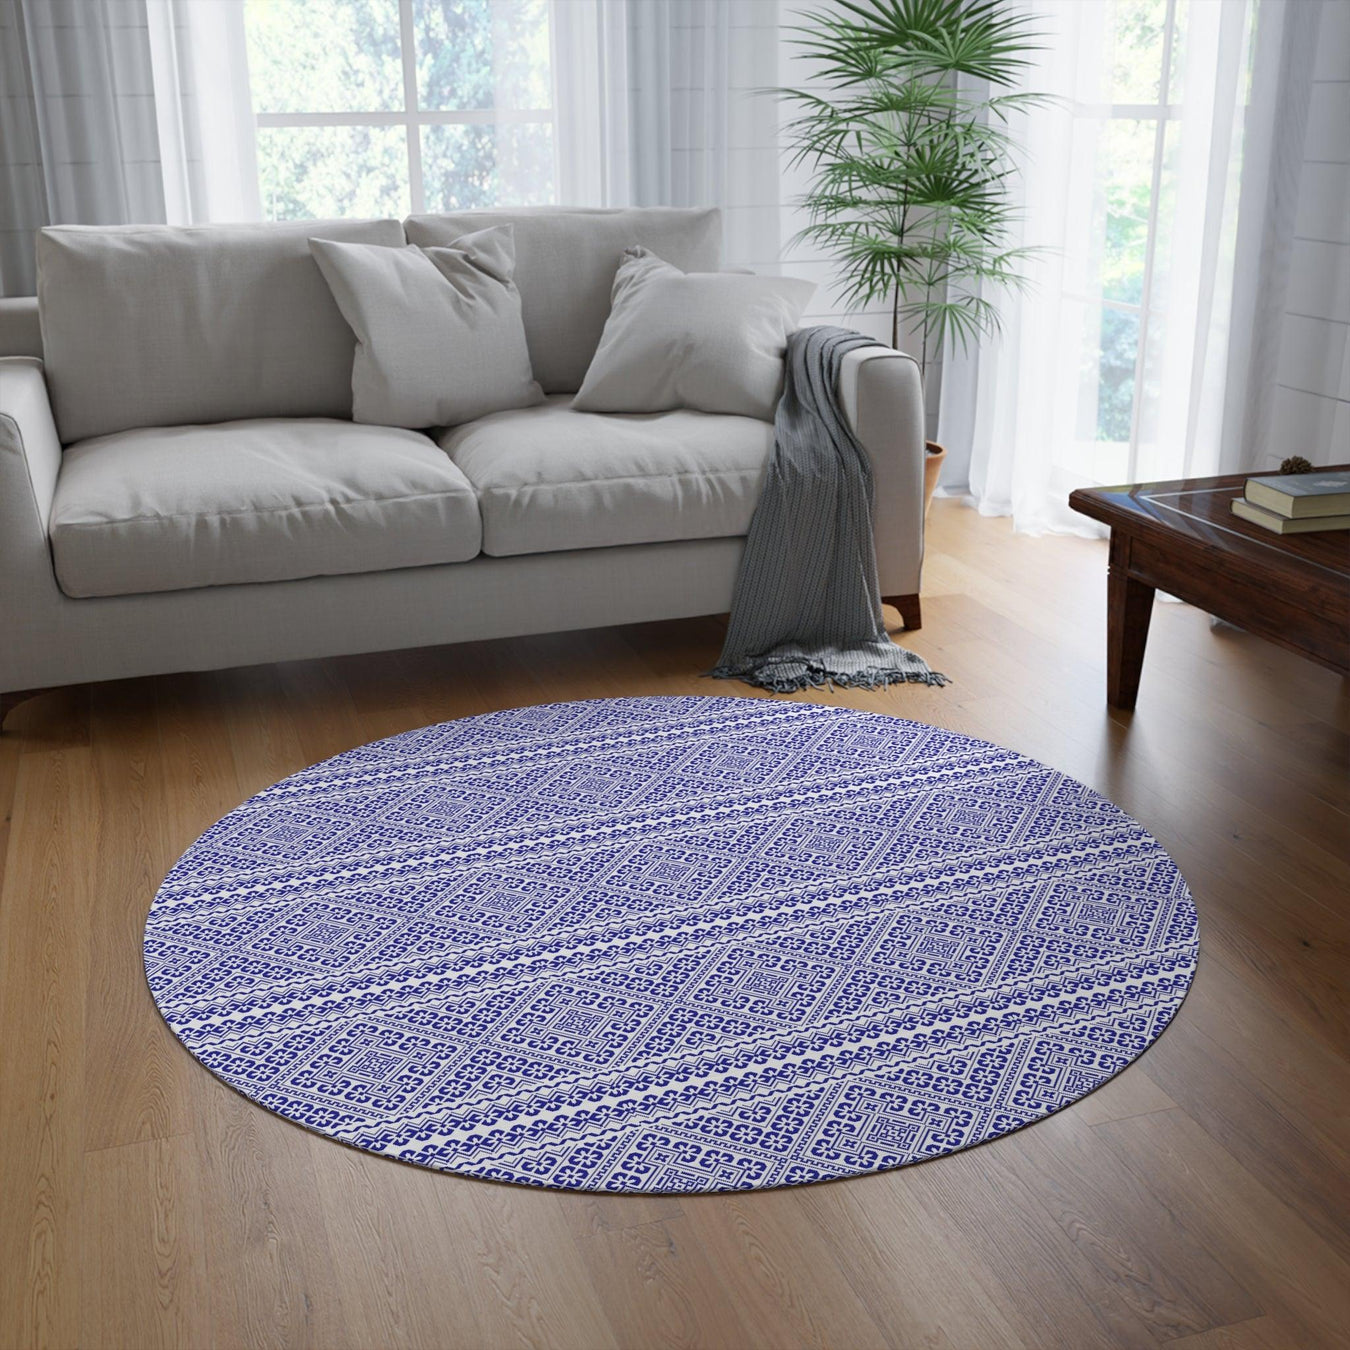 Stylish 60 Round Chenille Rug for Christmas Winter Holiday